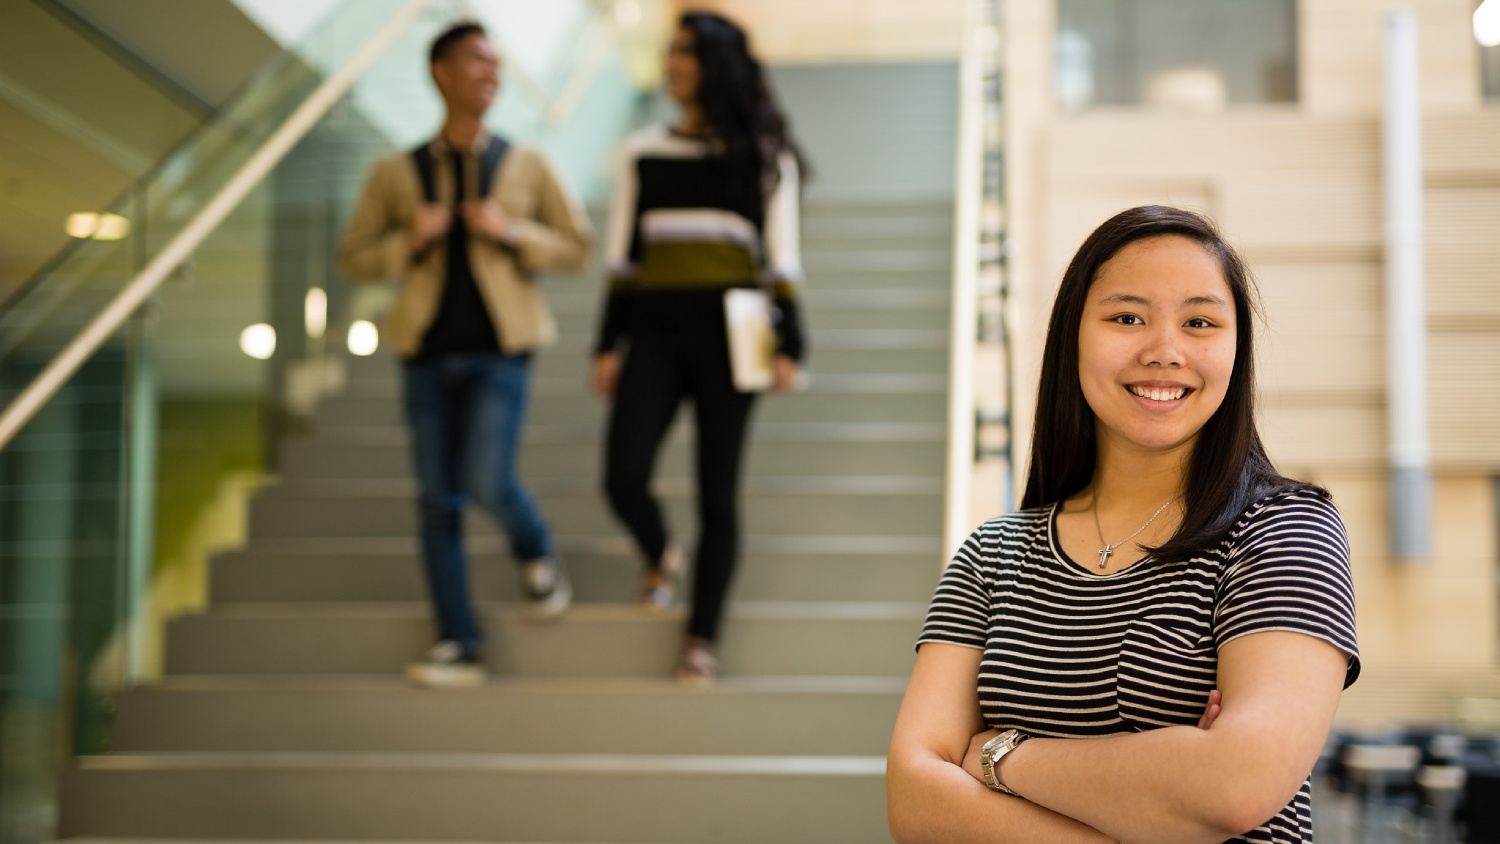 A smiling student standing in front of a staircase